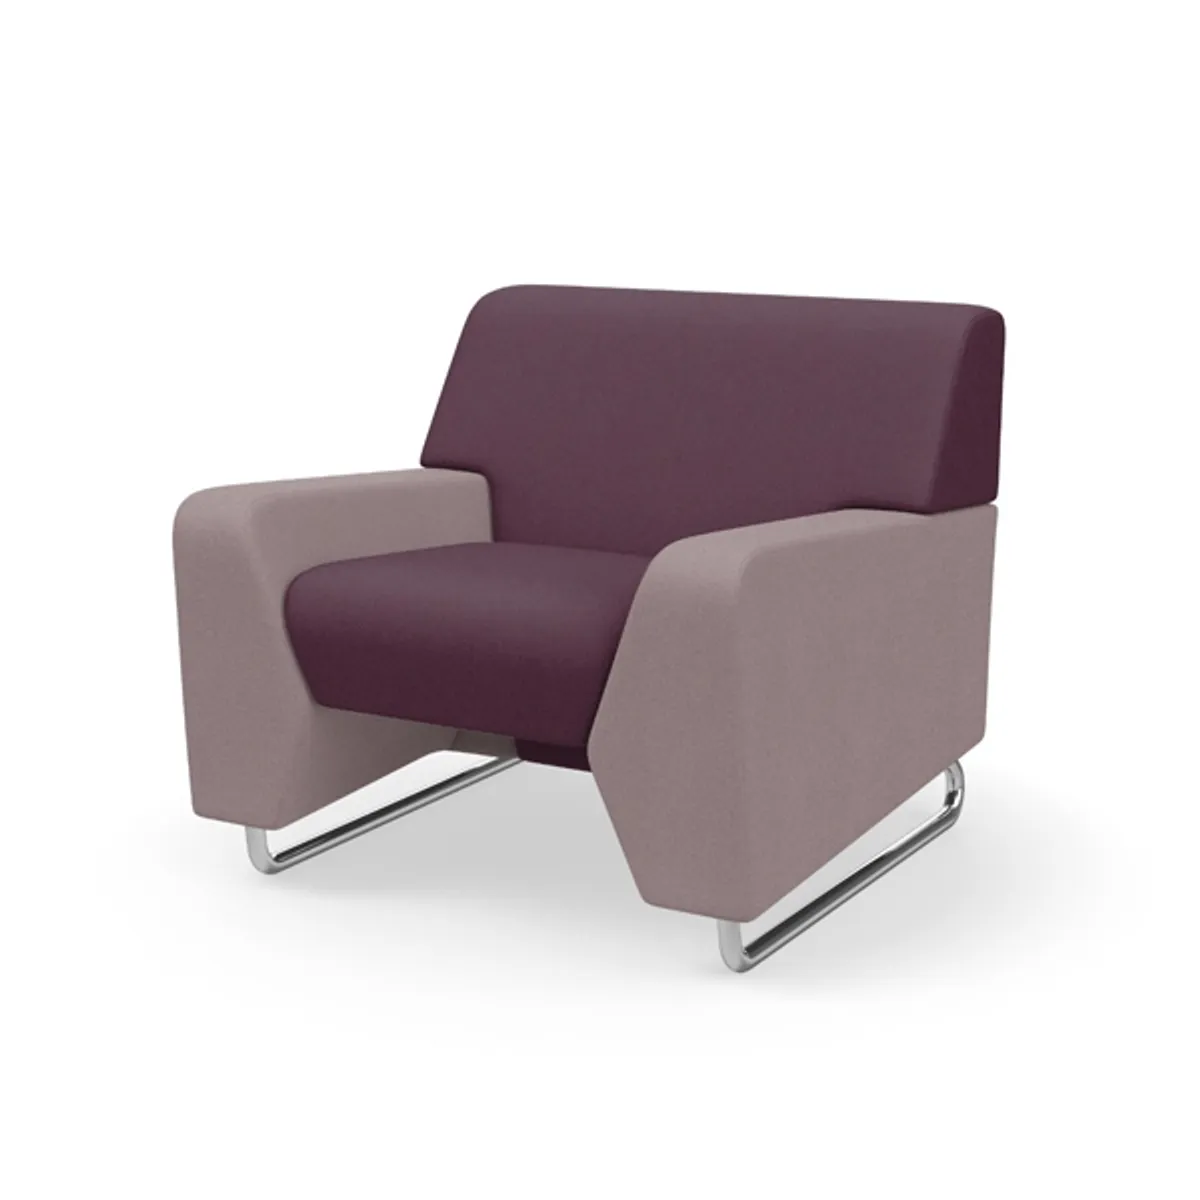 Varinia modular lounge chair Inside Out Contracts11